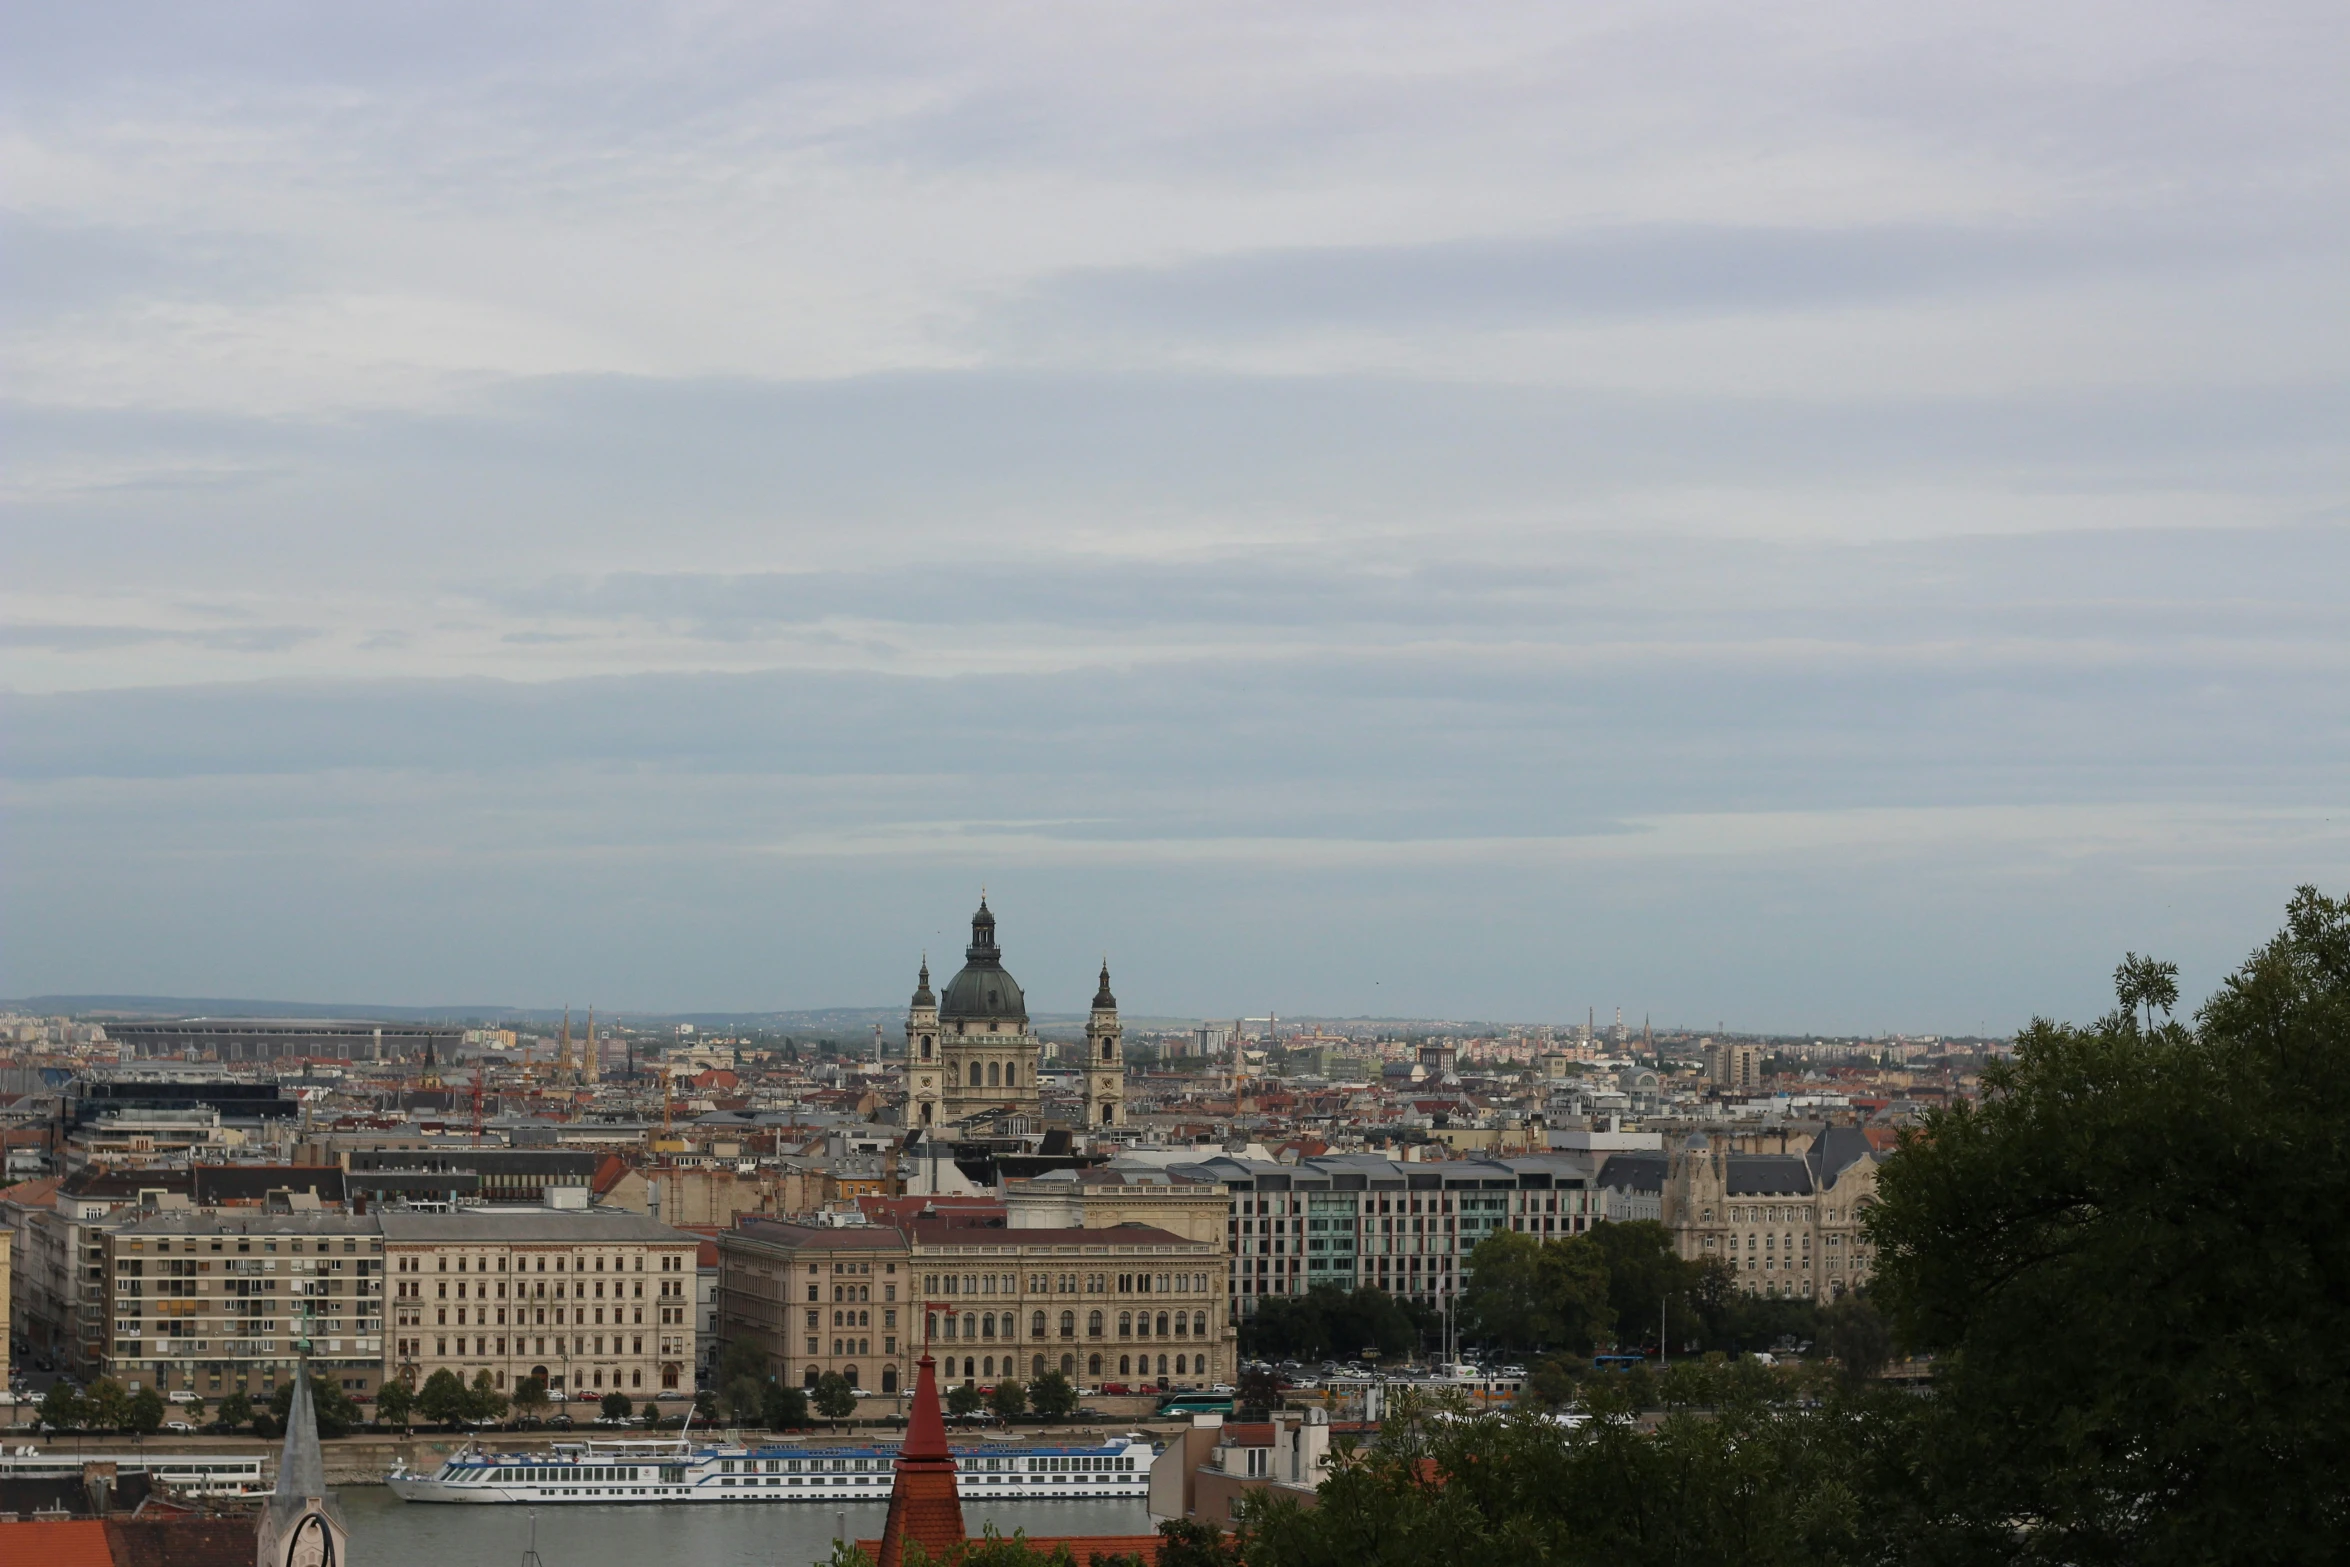 a city skyline is shown in the distance